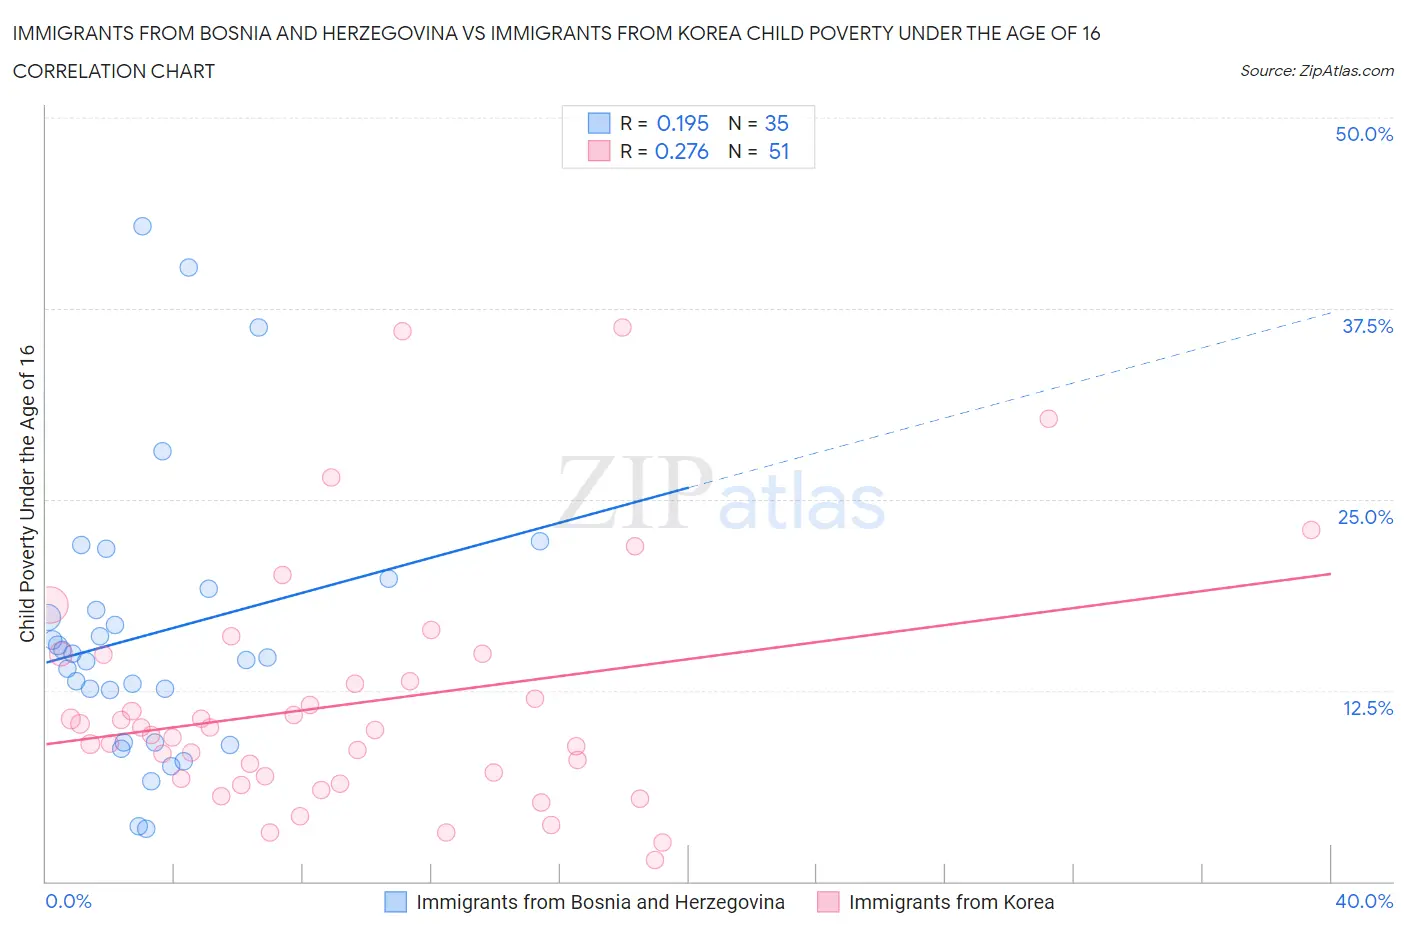 Immigrants from Bosnia and Herzegovina vs Immigrants from Korea Child Poverty Under the Age of 16